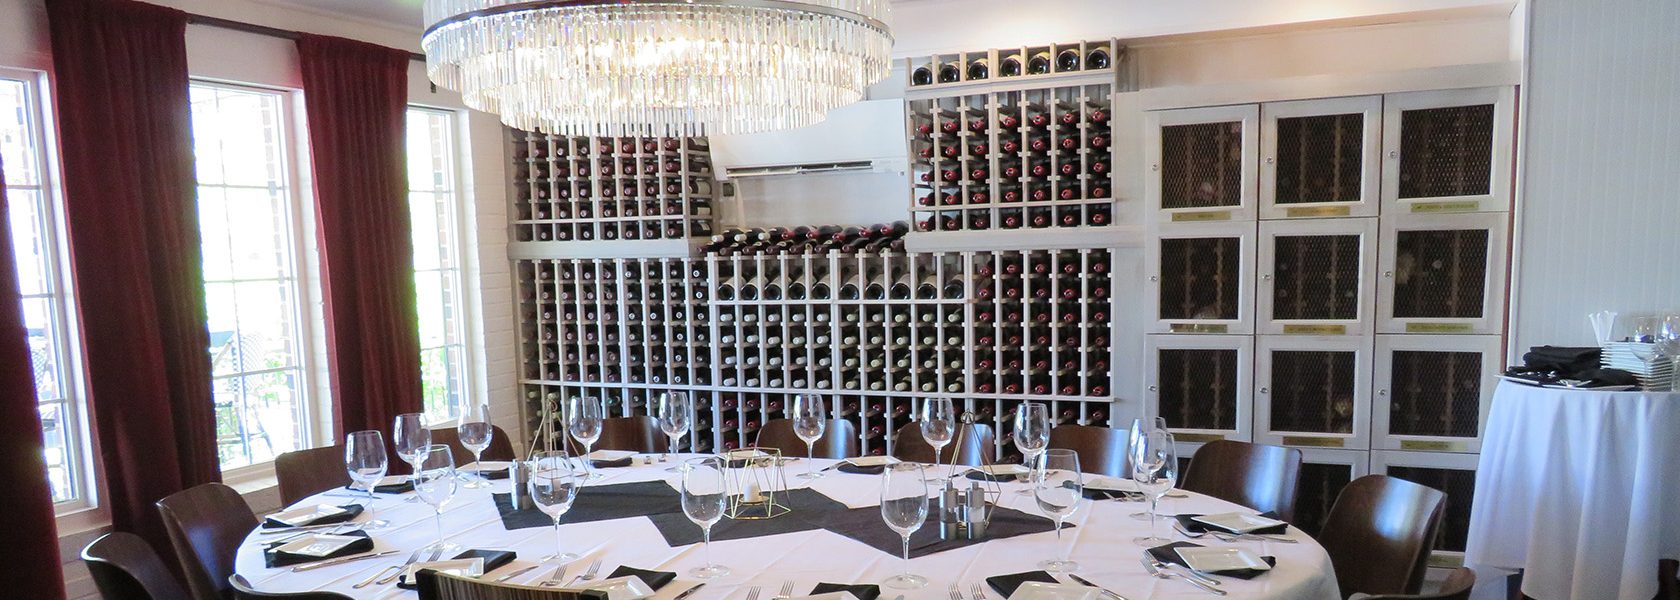 Table for 12 set in wine cellar room with wine lockers.